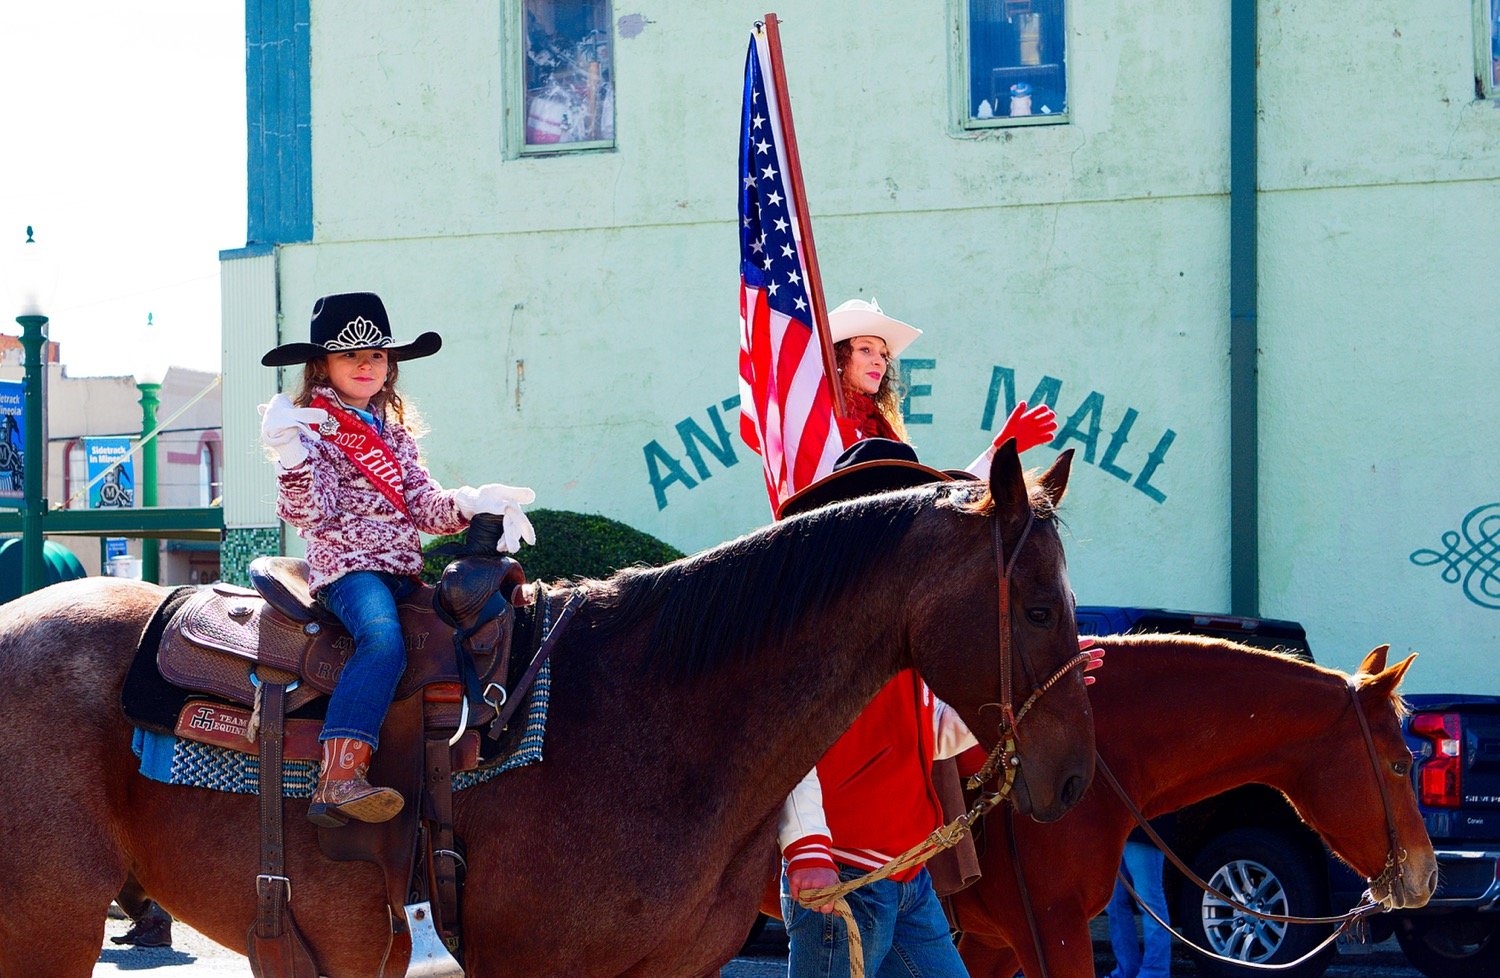 Riding in the parade on horse are Little Miss Mineola Fire Dept. Rodeo Layla Carrell and Niss MFDR Makayla Mitchell. [view more vets]